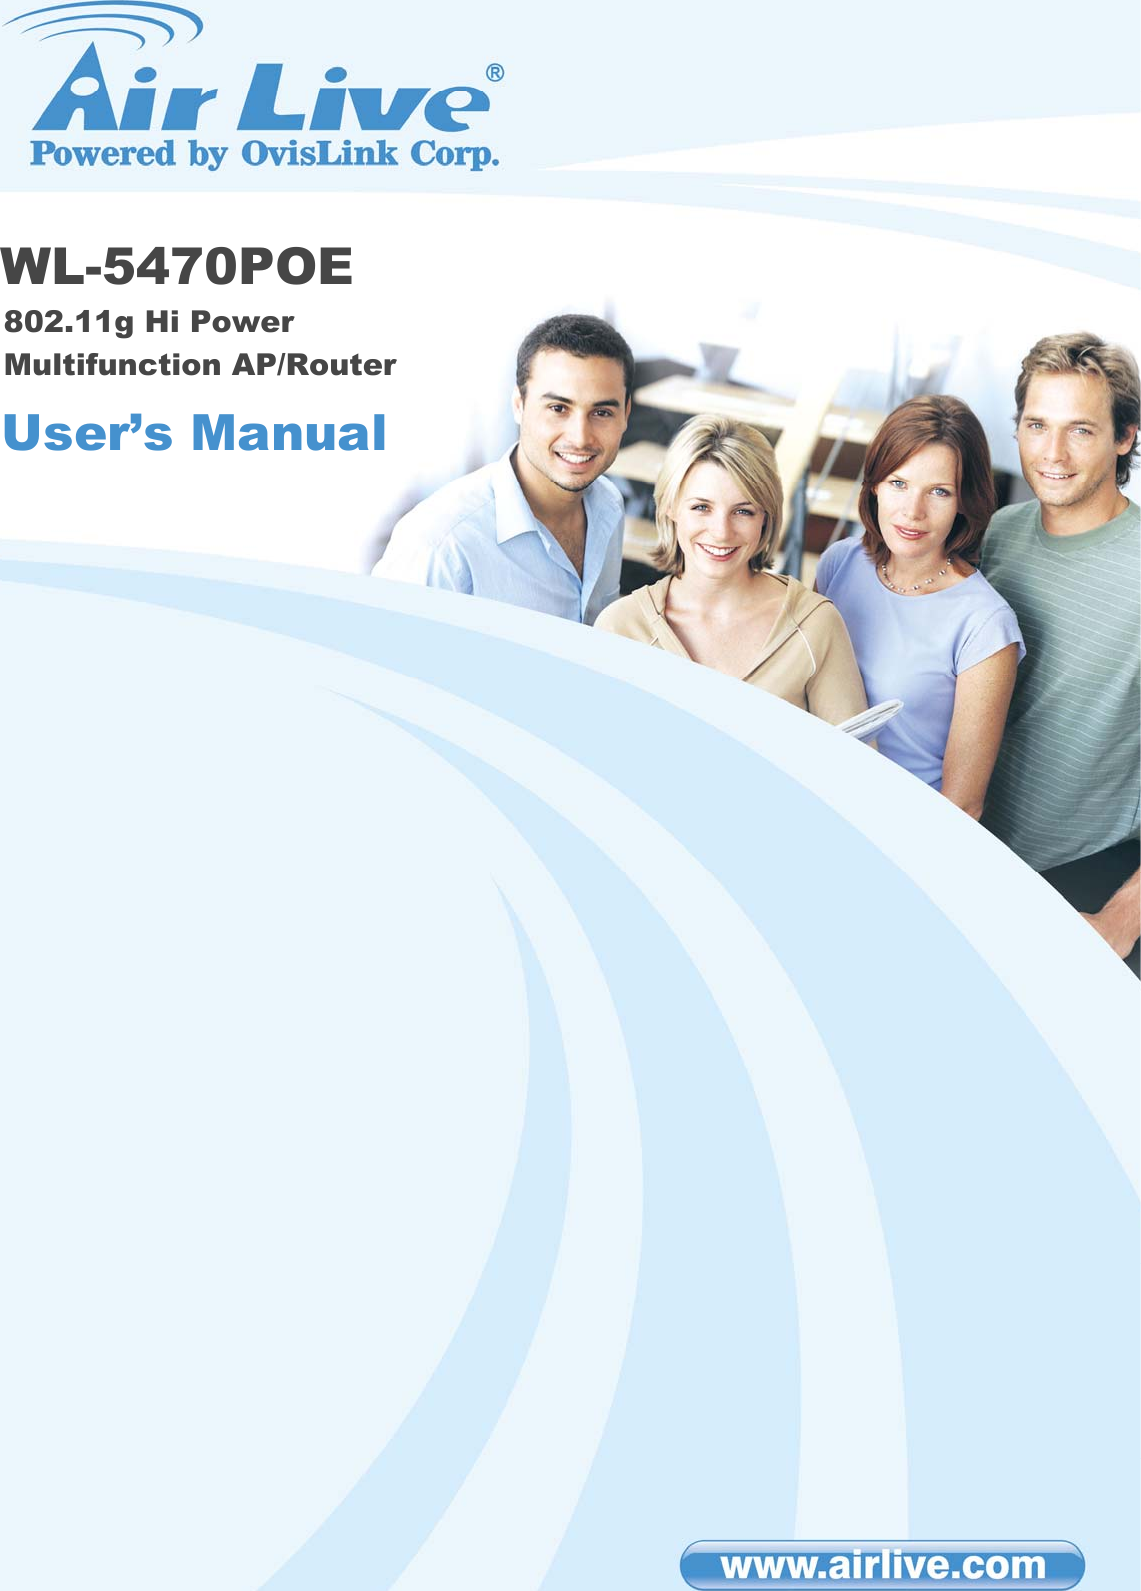                                                           1                           AirLive WL-5470POE User’s Manual  WL-5470POE 802.11g Hi Power Multifunction AP/Router User’s Manual 